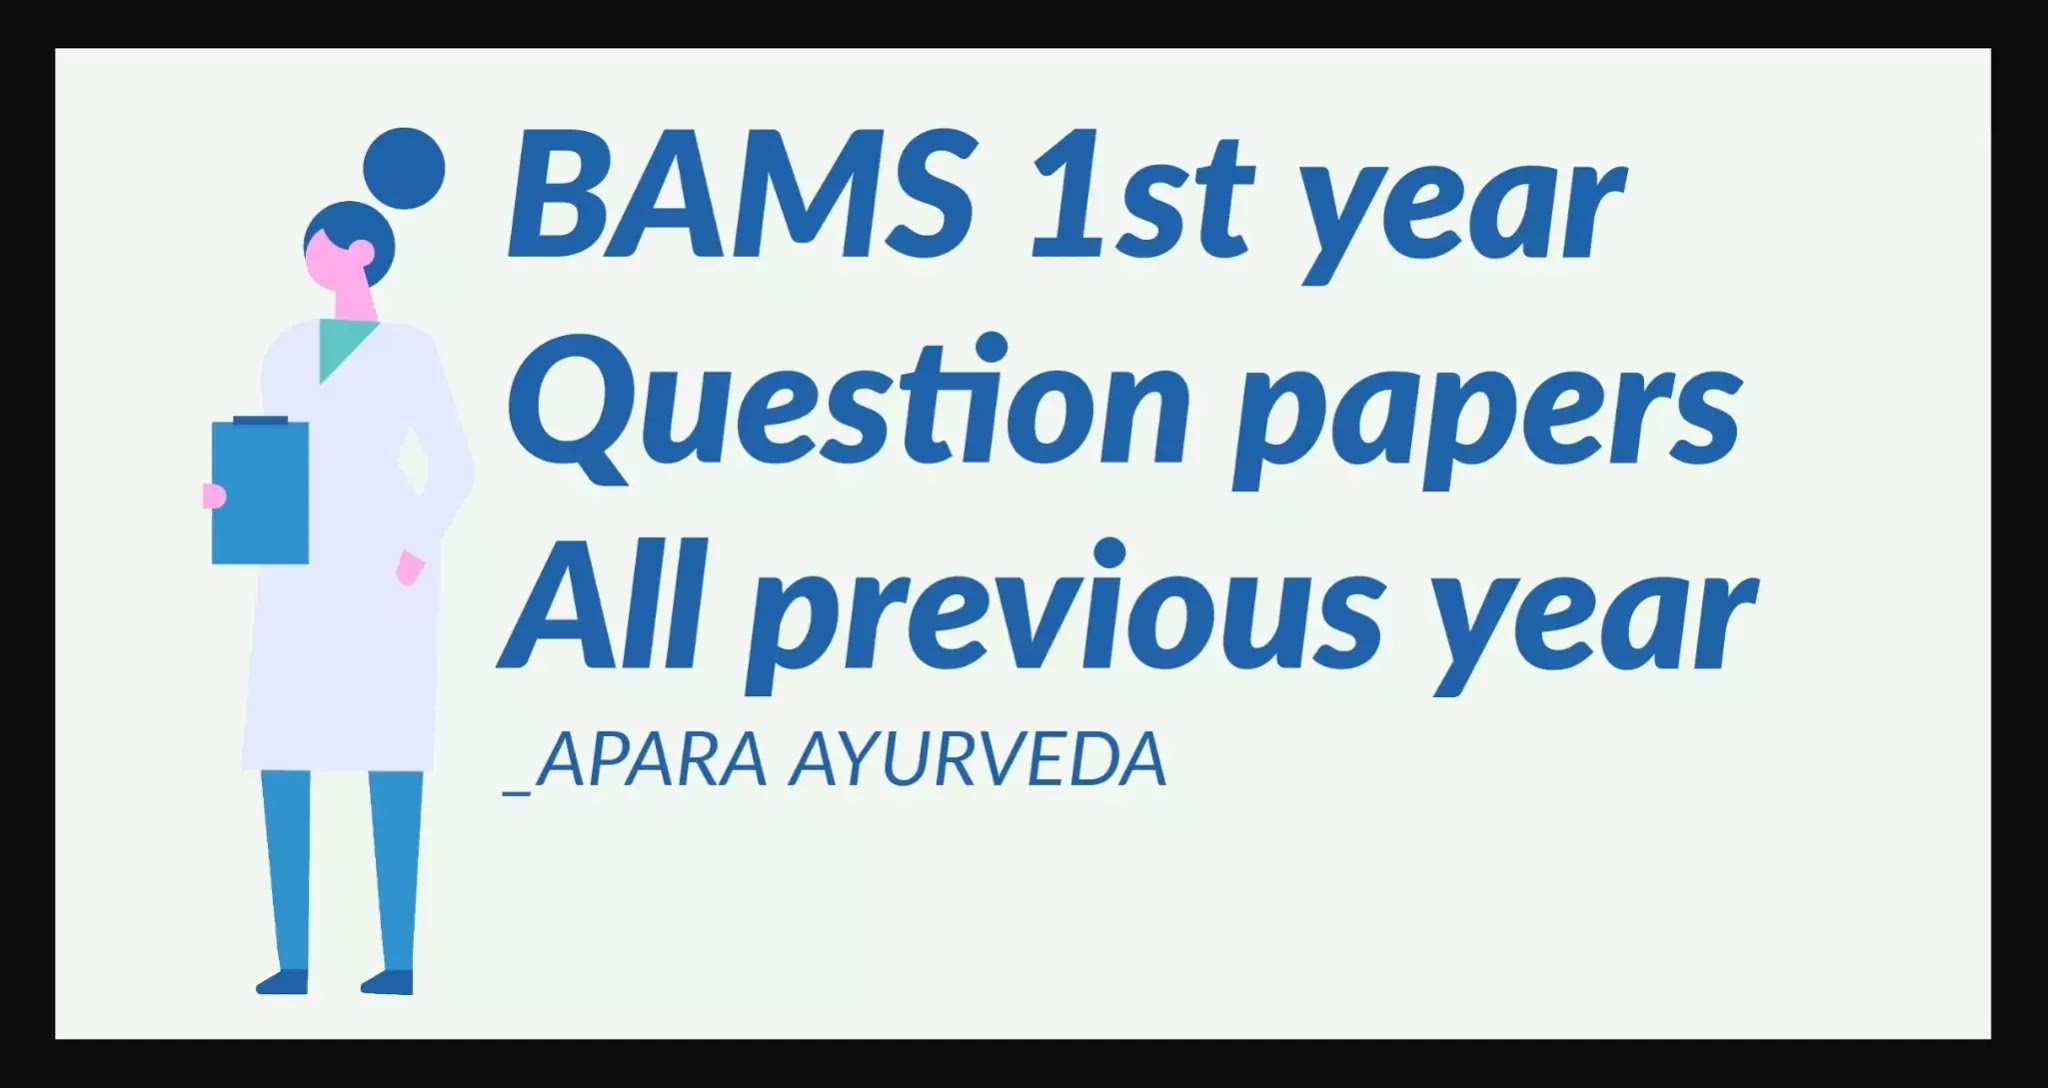 1st_year_bams_question_papers